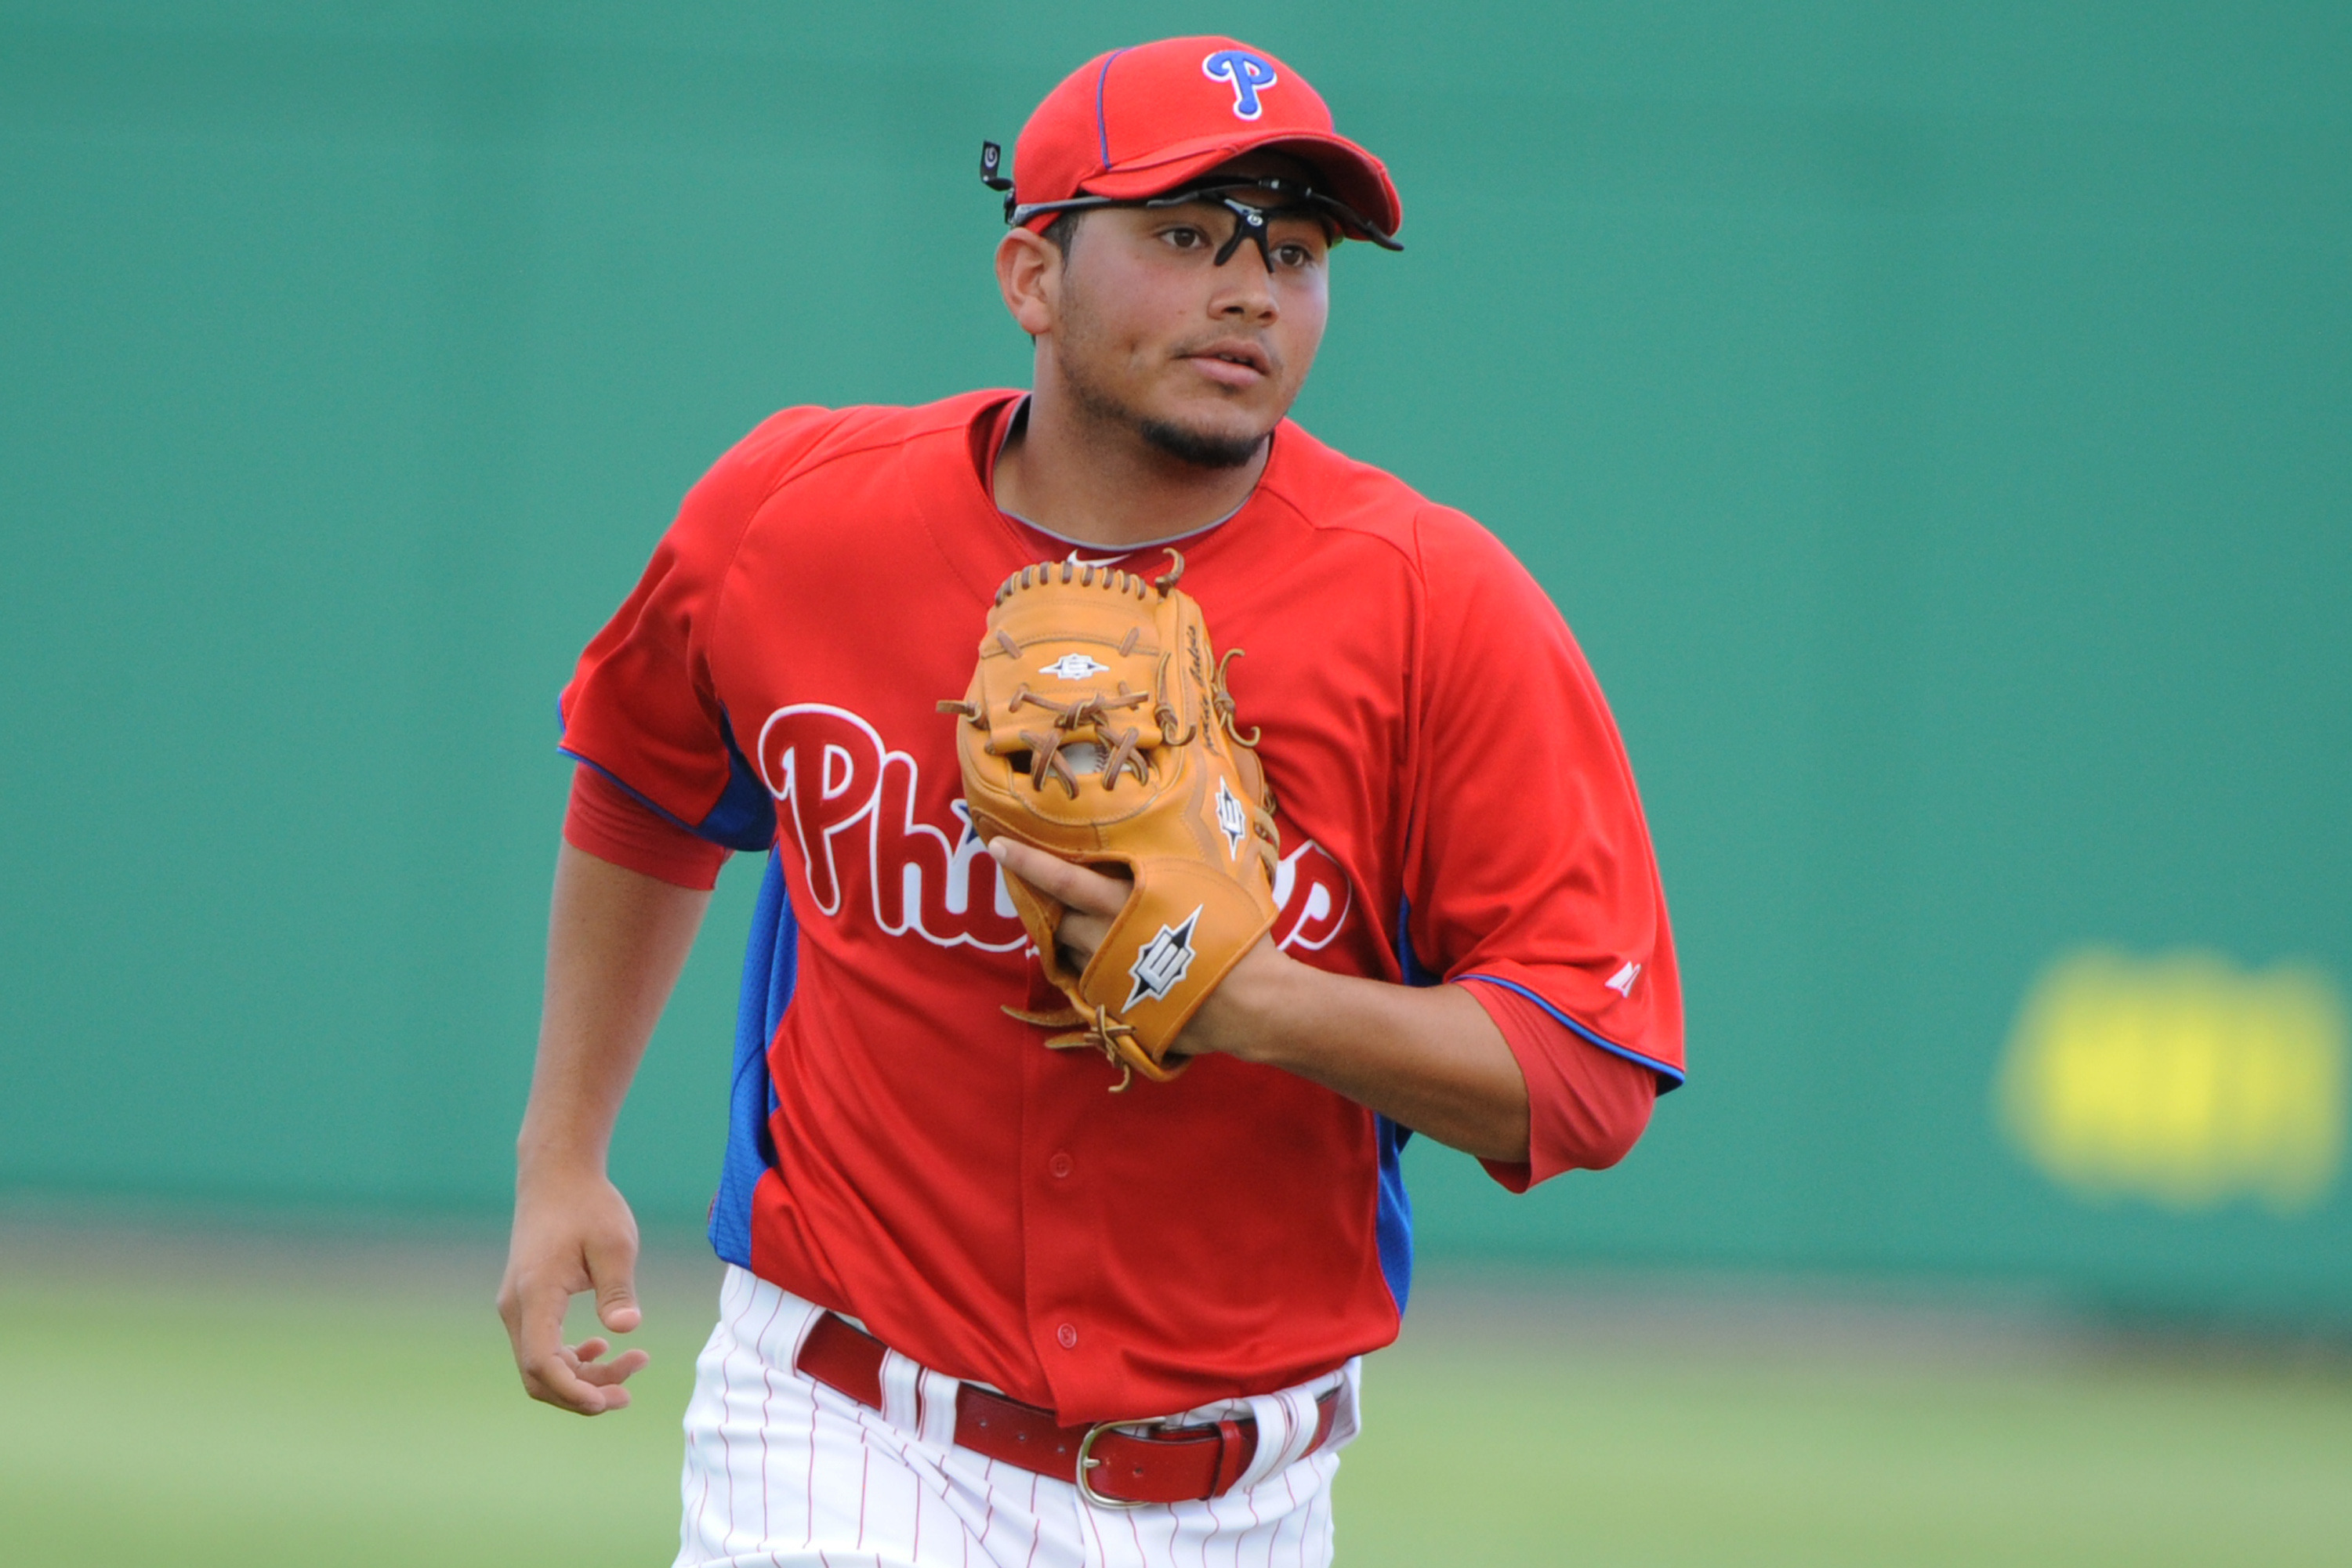 Phillies 2016 Player Preview: Freddy Galvis - The Good Phight